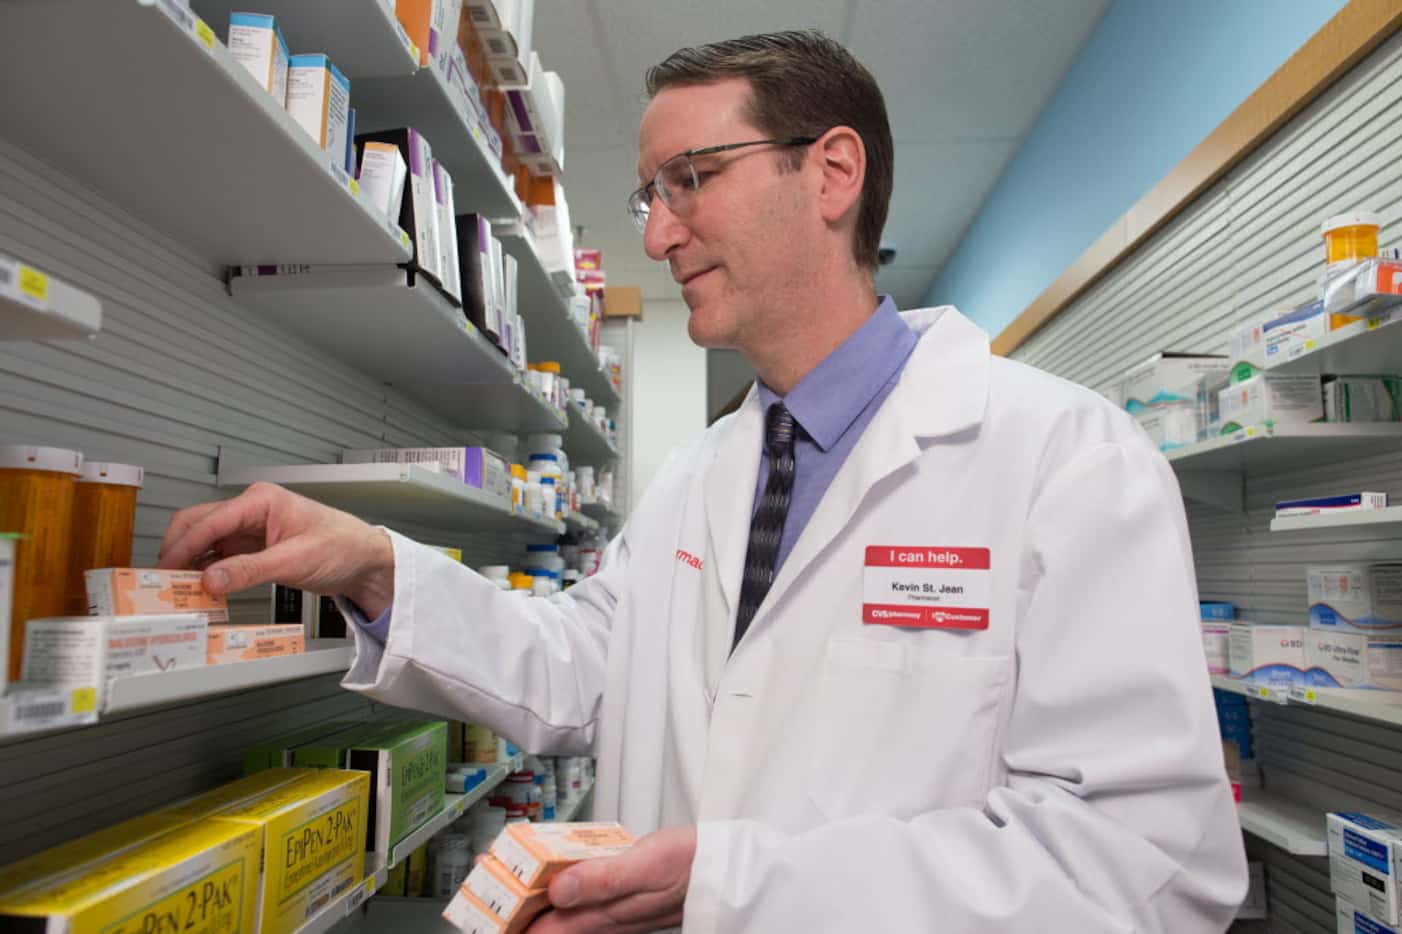 CVS has a deal to distribute the drug in its stores, but no major chains have introduced...